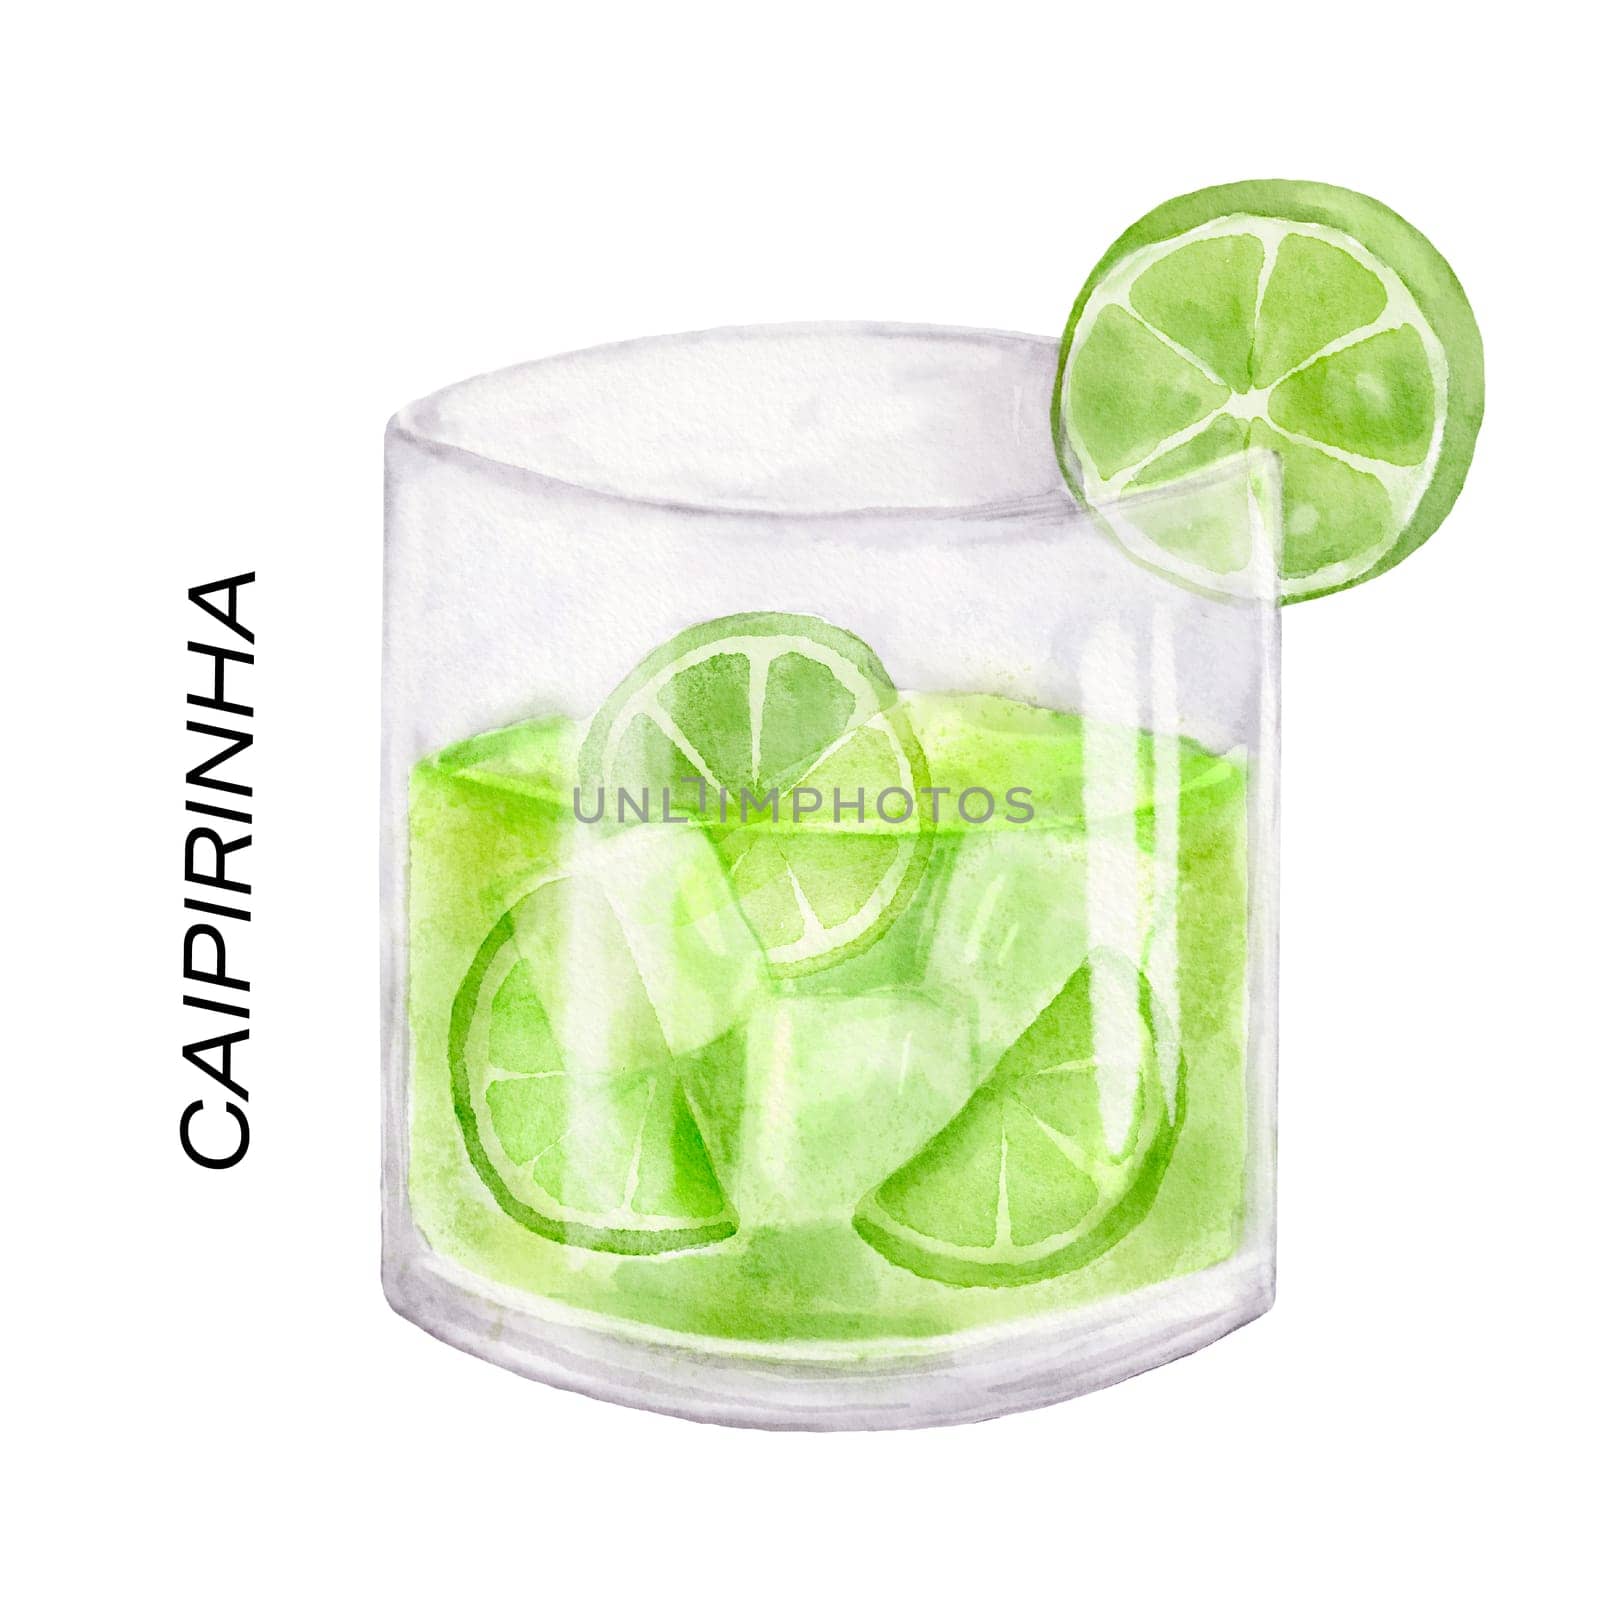 Lime Brazil Caipirinha cocktail. Watercolor illustration of drink in glass isolated on white by ElenaPlatova